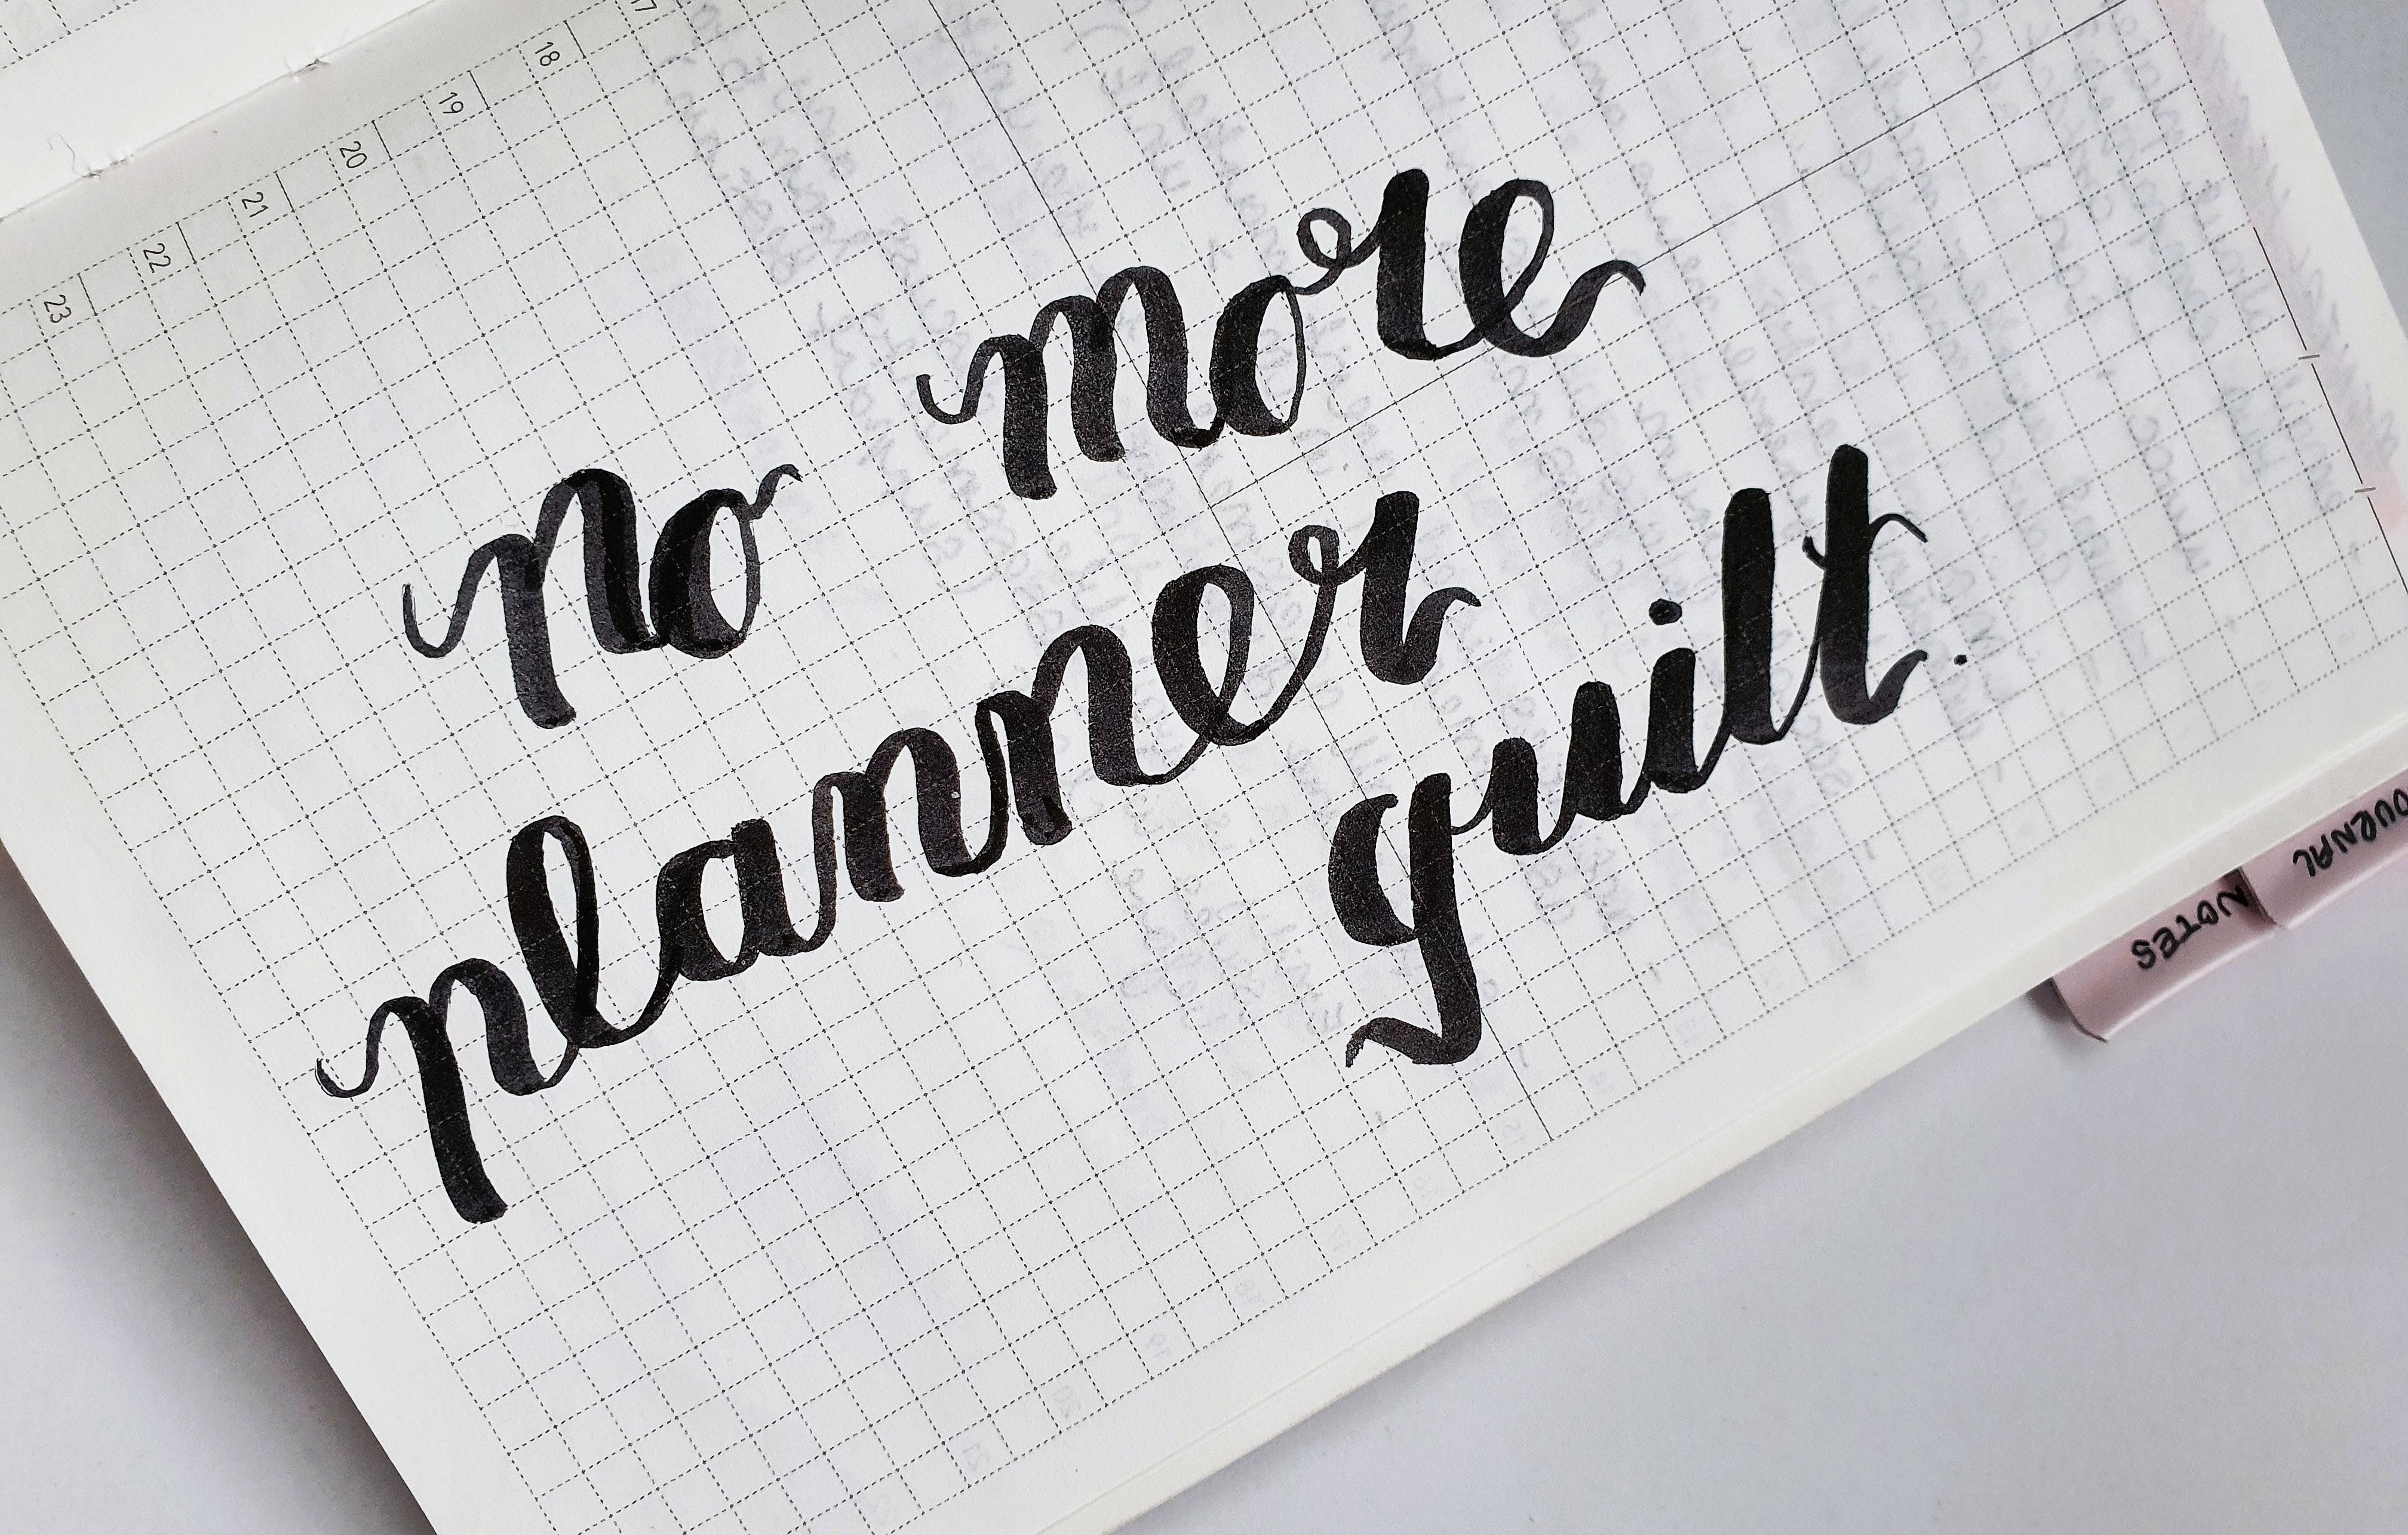 Dealing with Planner Guilt